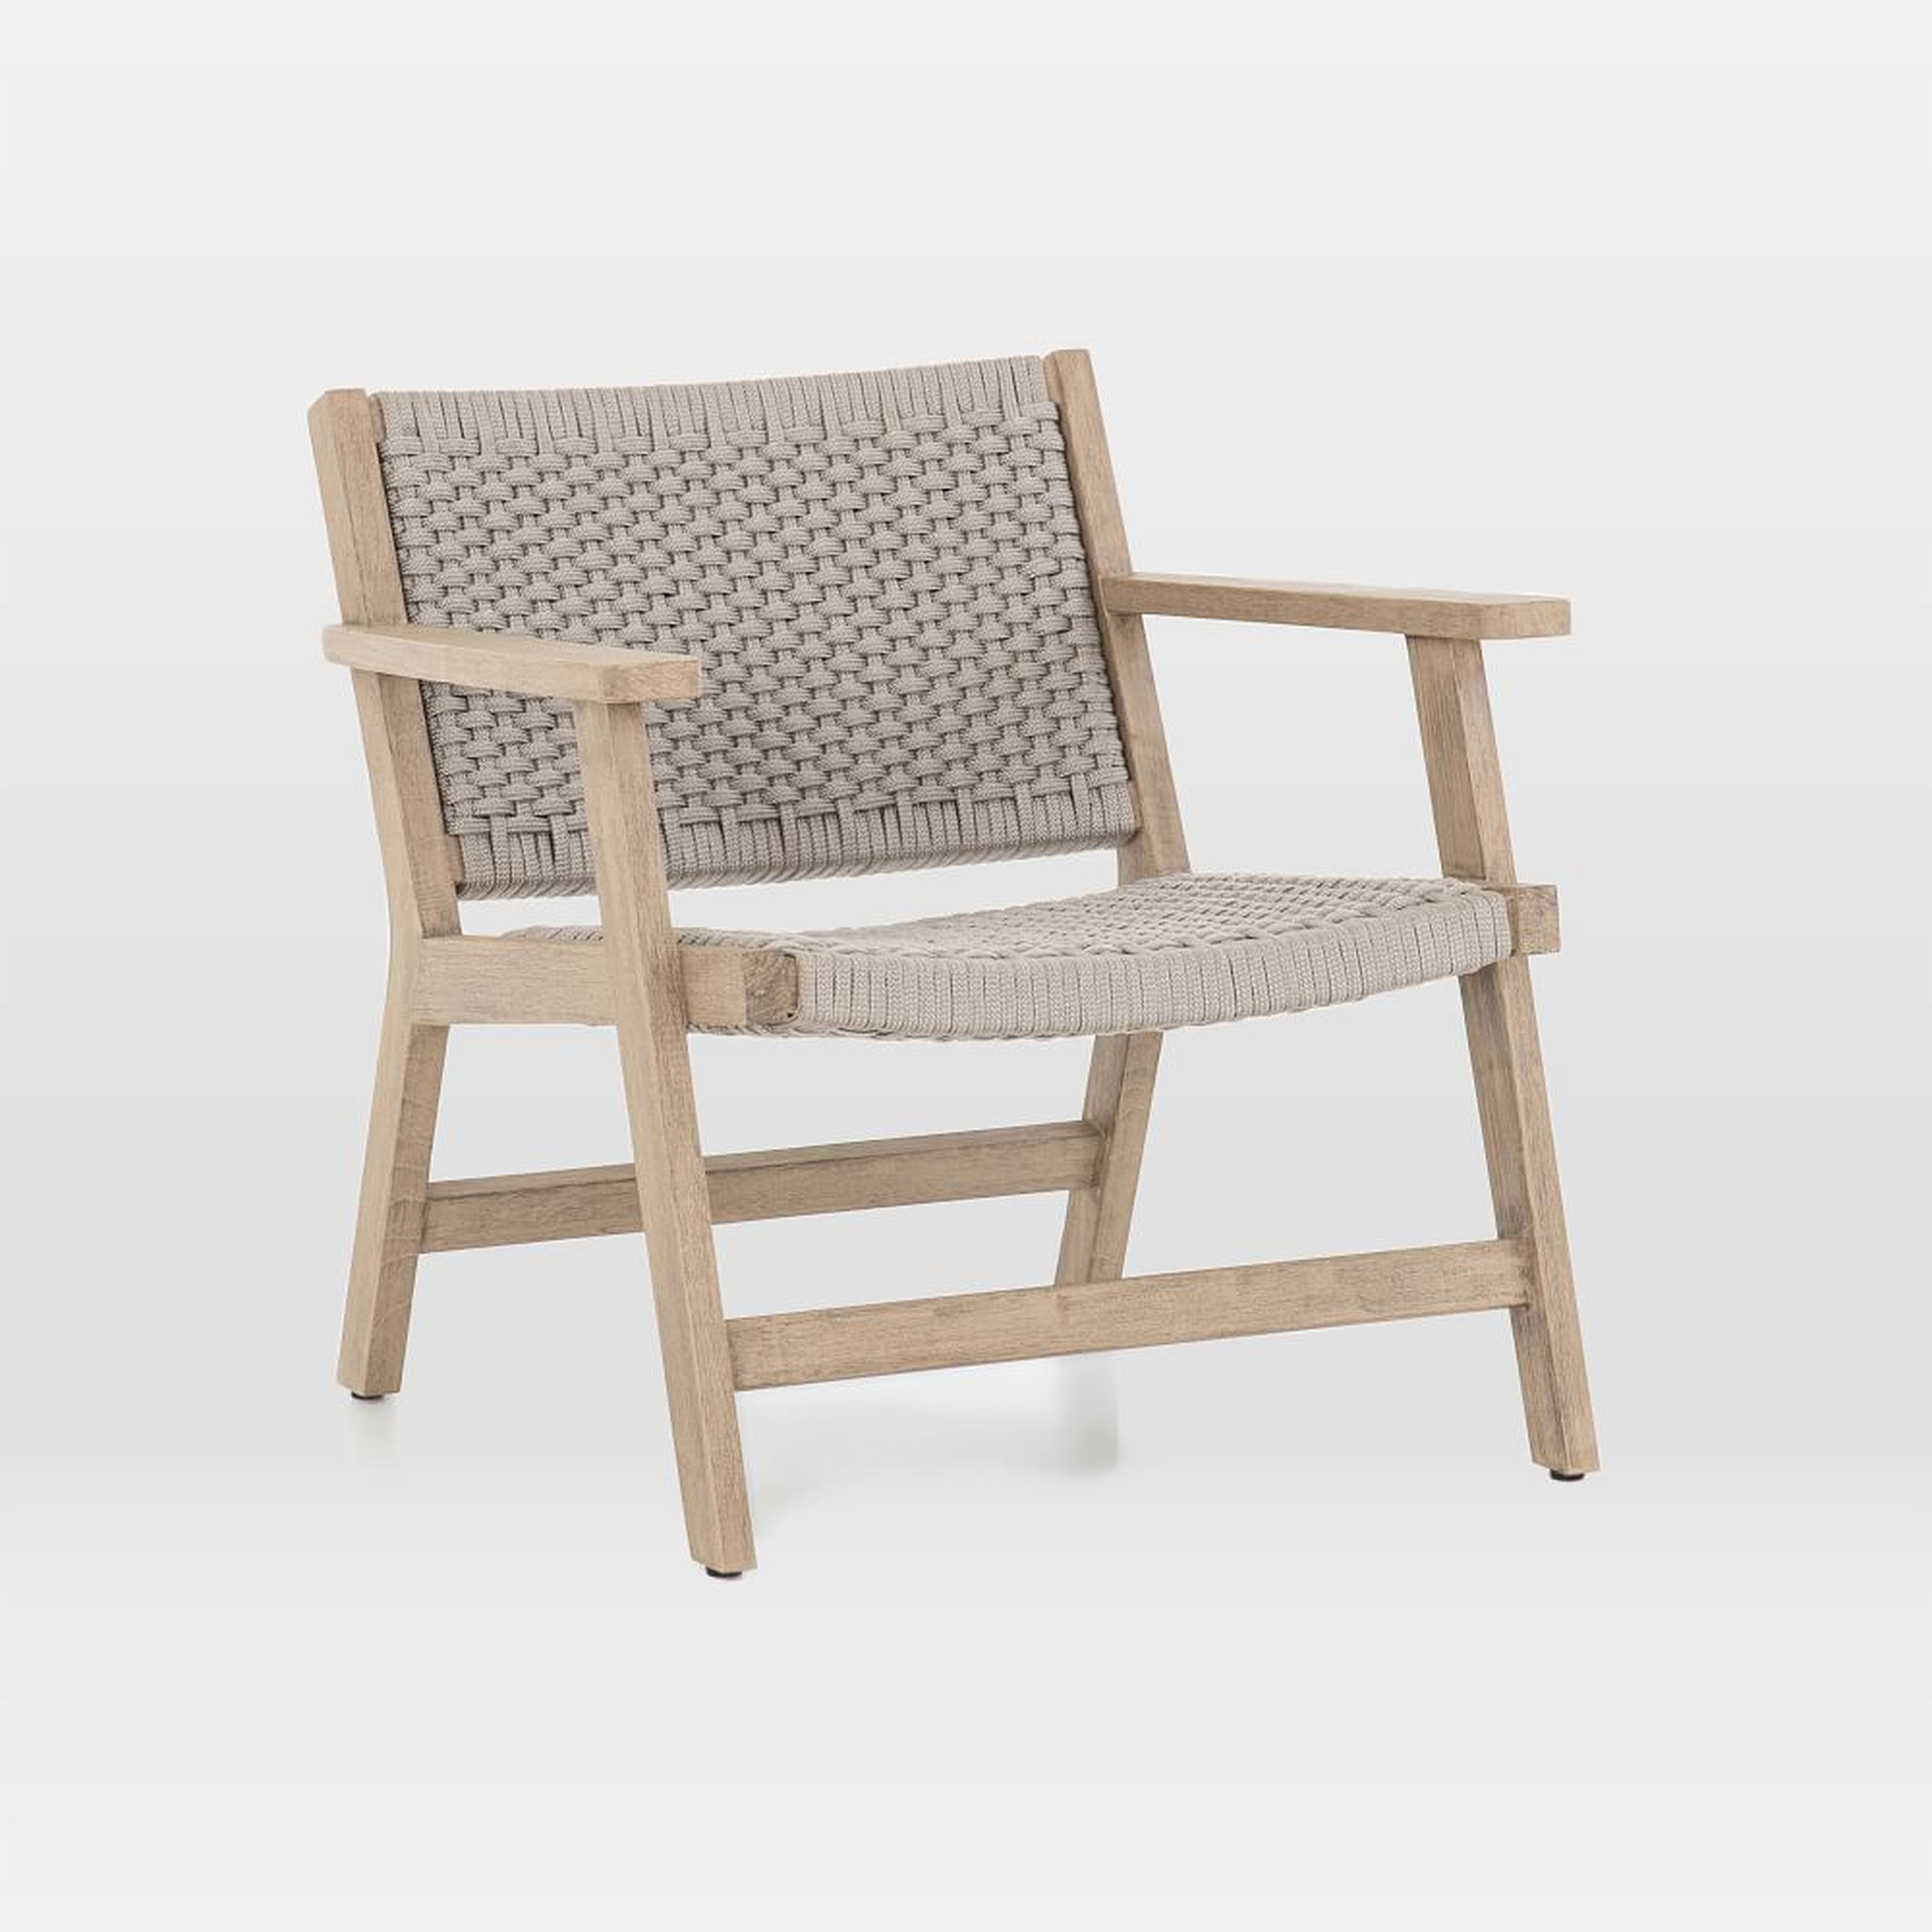 Catania Outdoor Rope Chair, Weathered Brown - West Elm